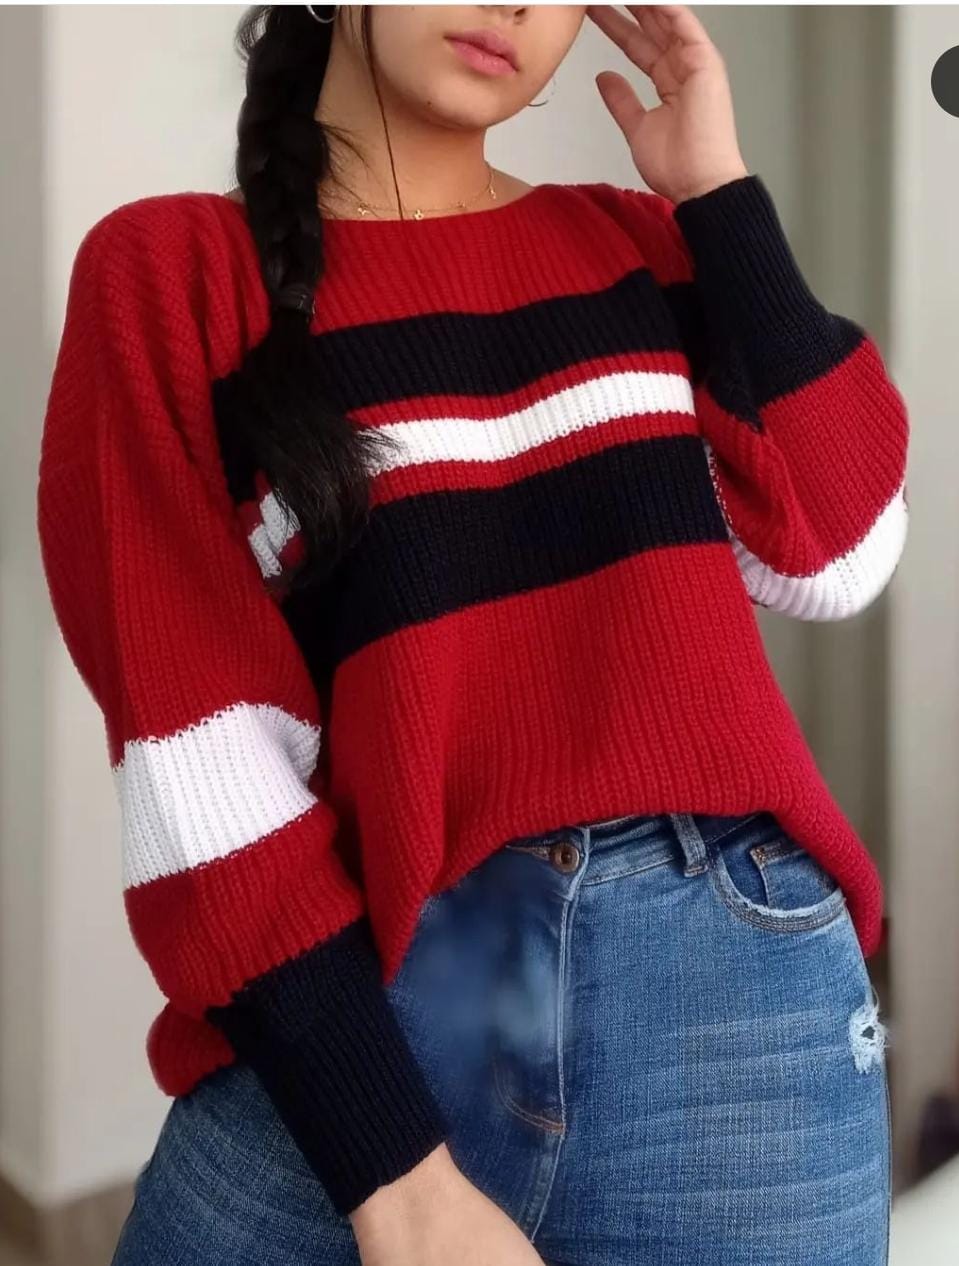 Red knit Sweater